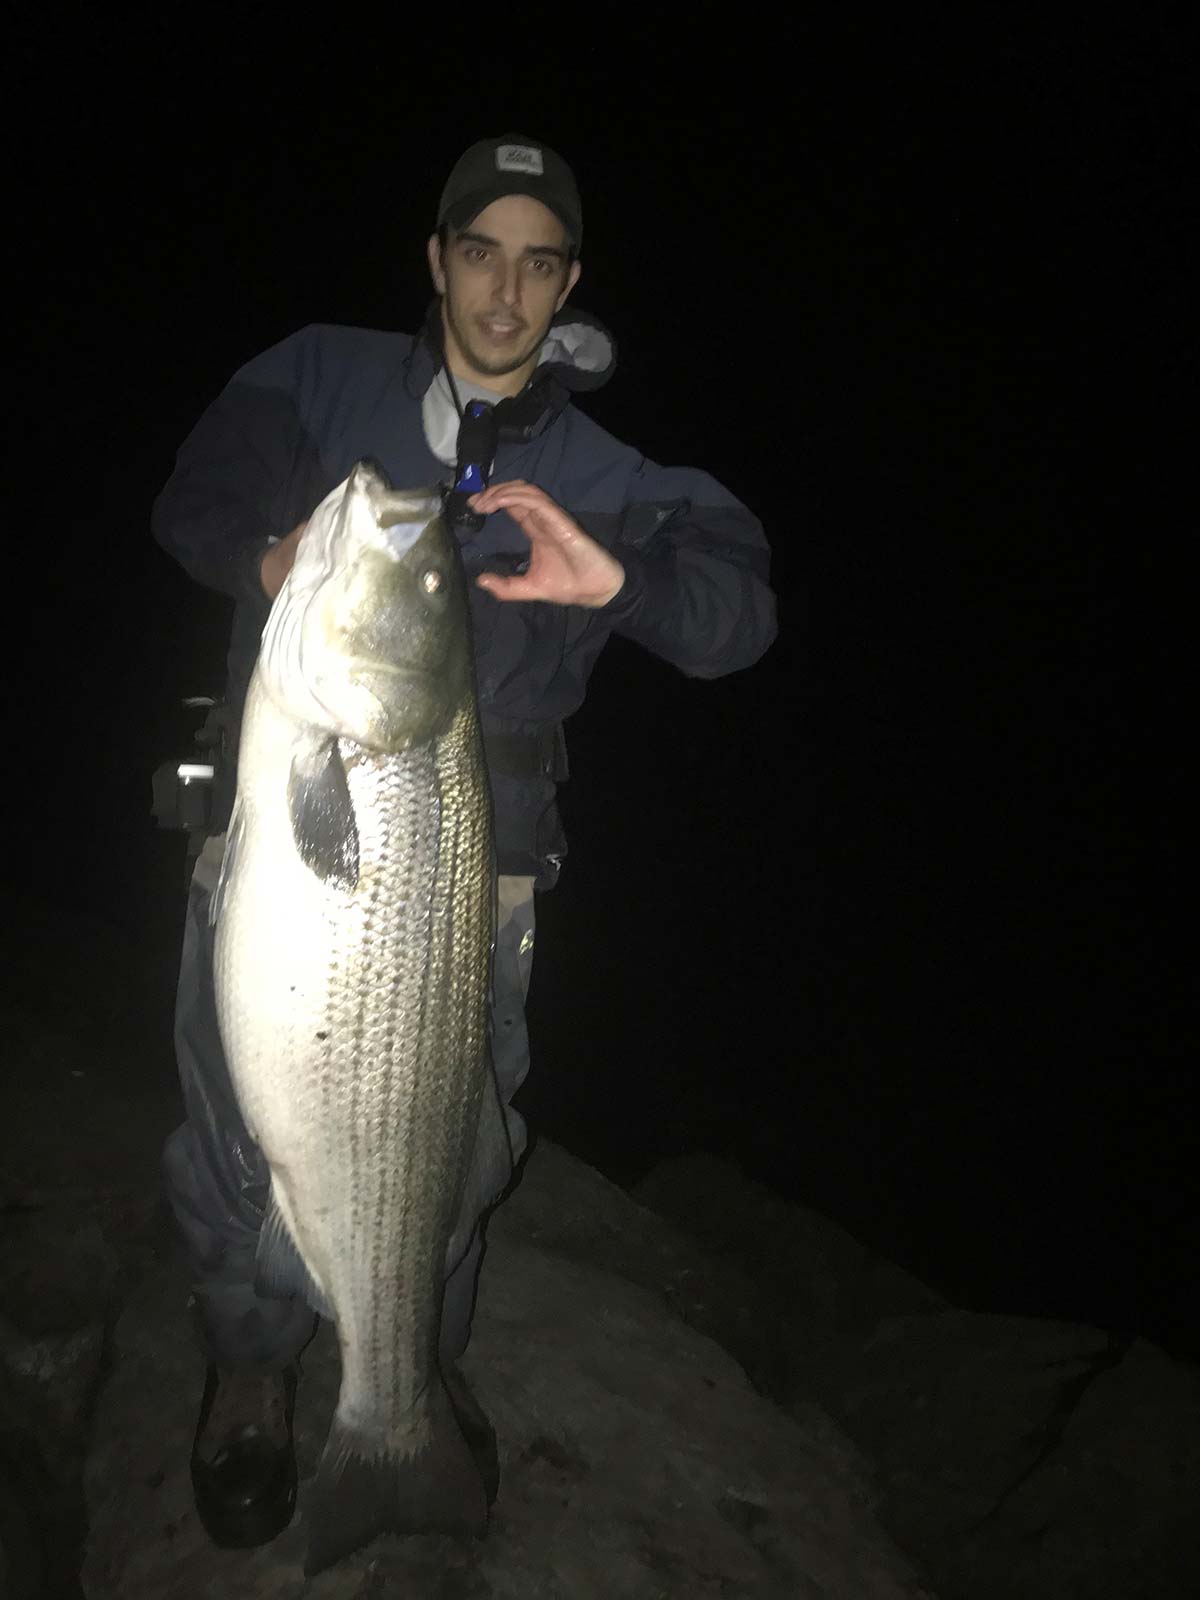 Andrea Caruana won the Surf Rats Ball tournament with his impressive 48-pound bass.